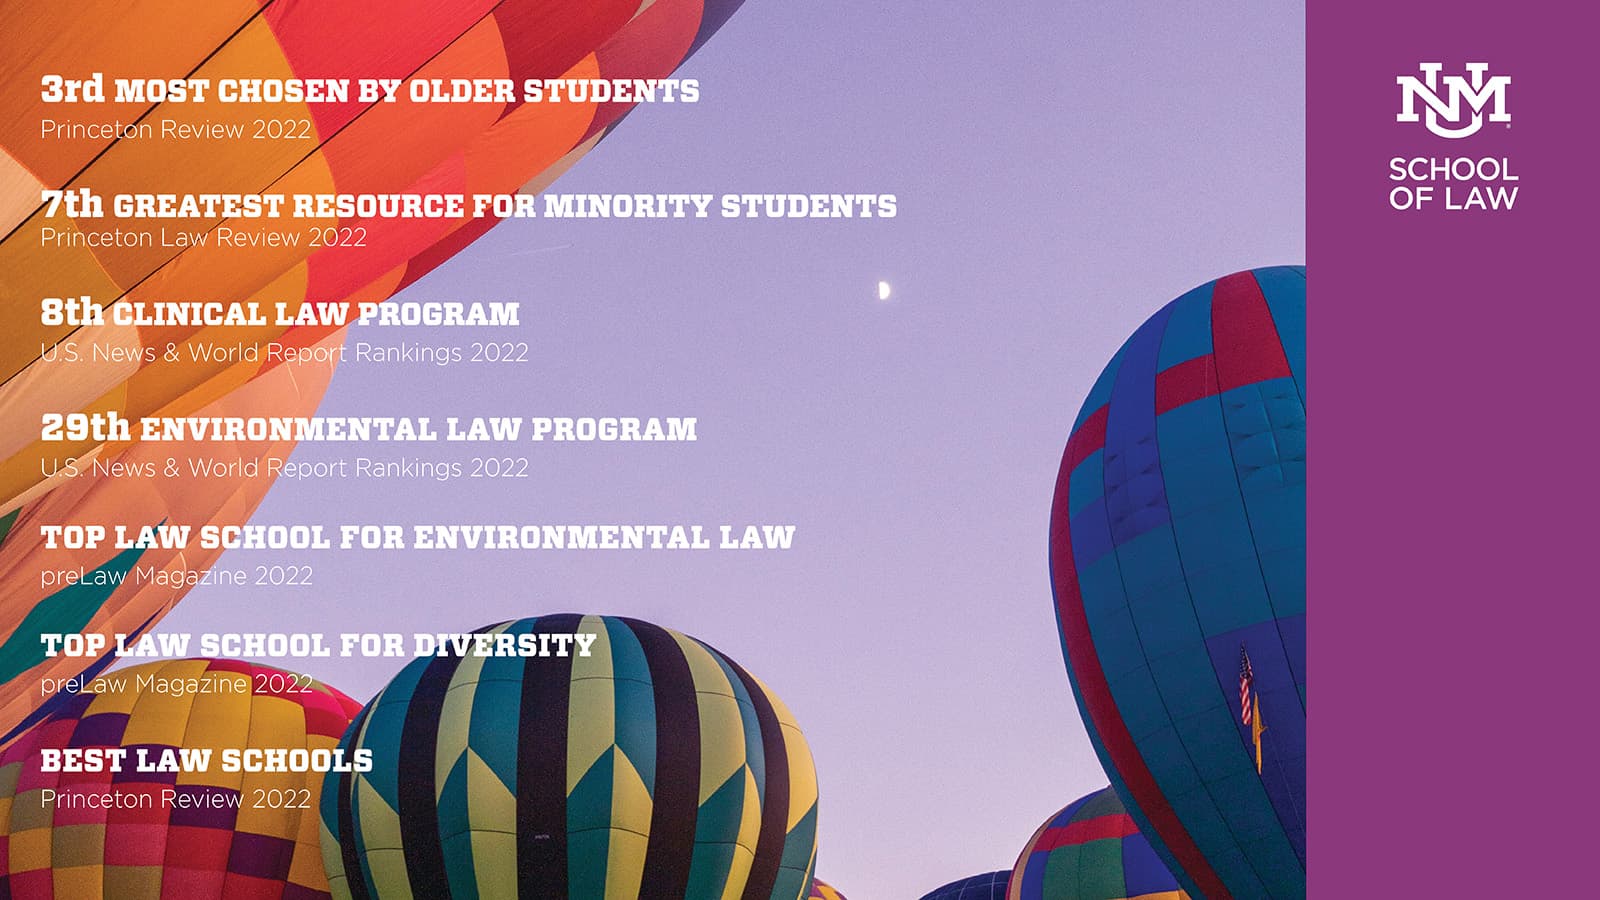 Why UNM Law?